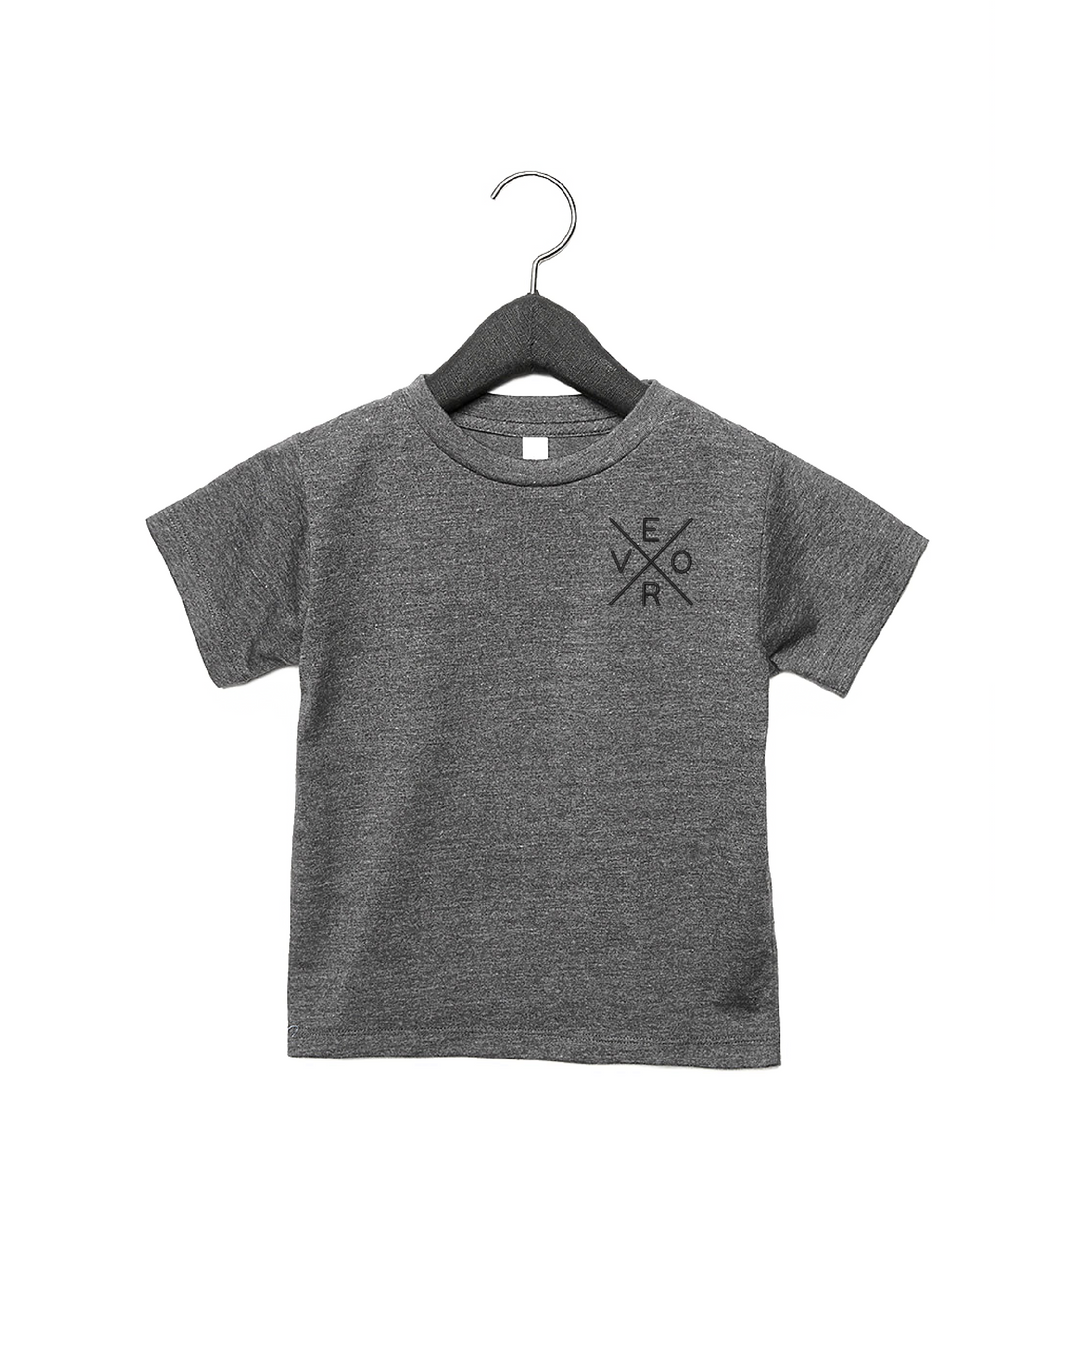 Vero Toddler T - Grey (Embroidered)